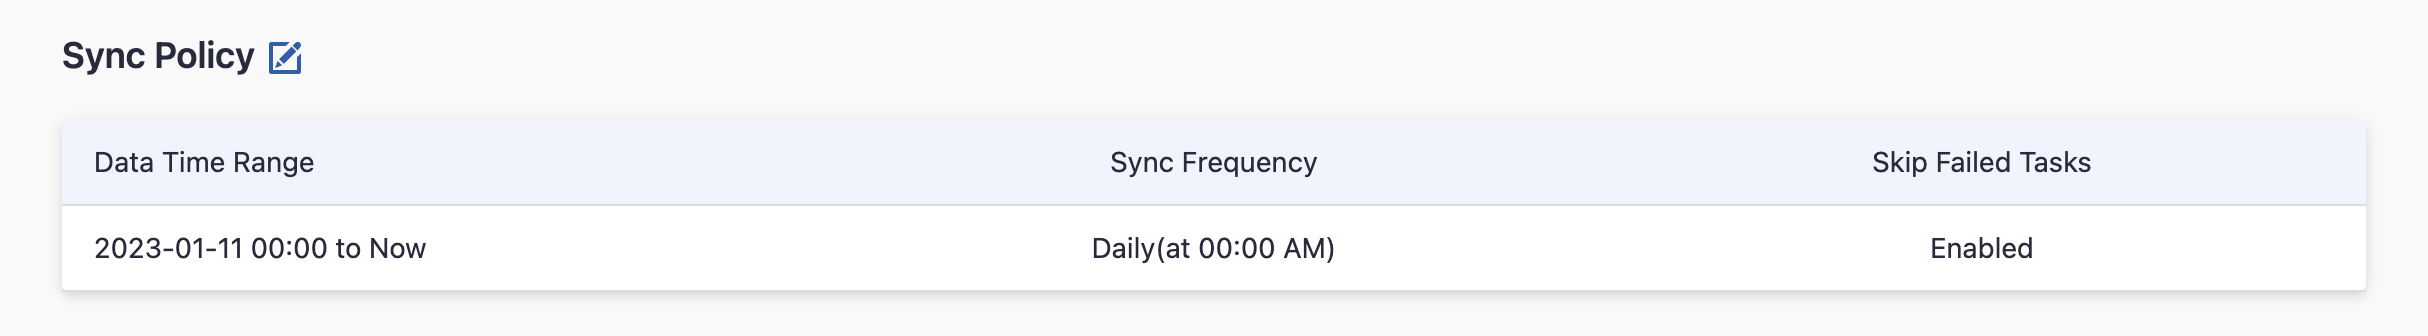 sync-policy